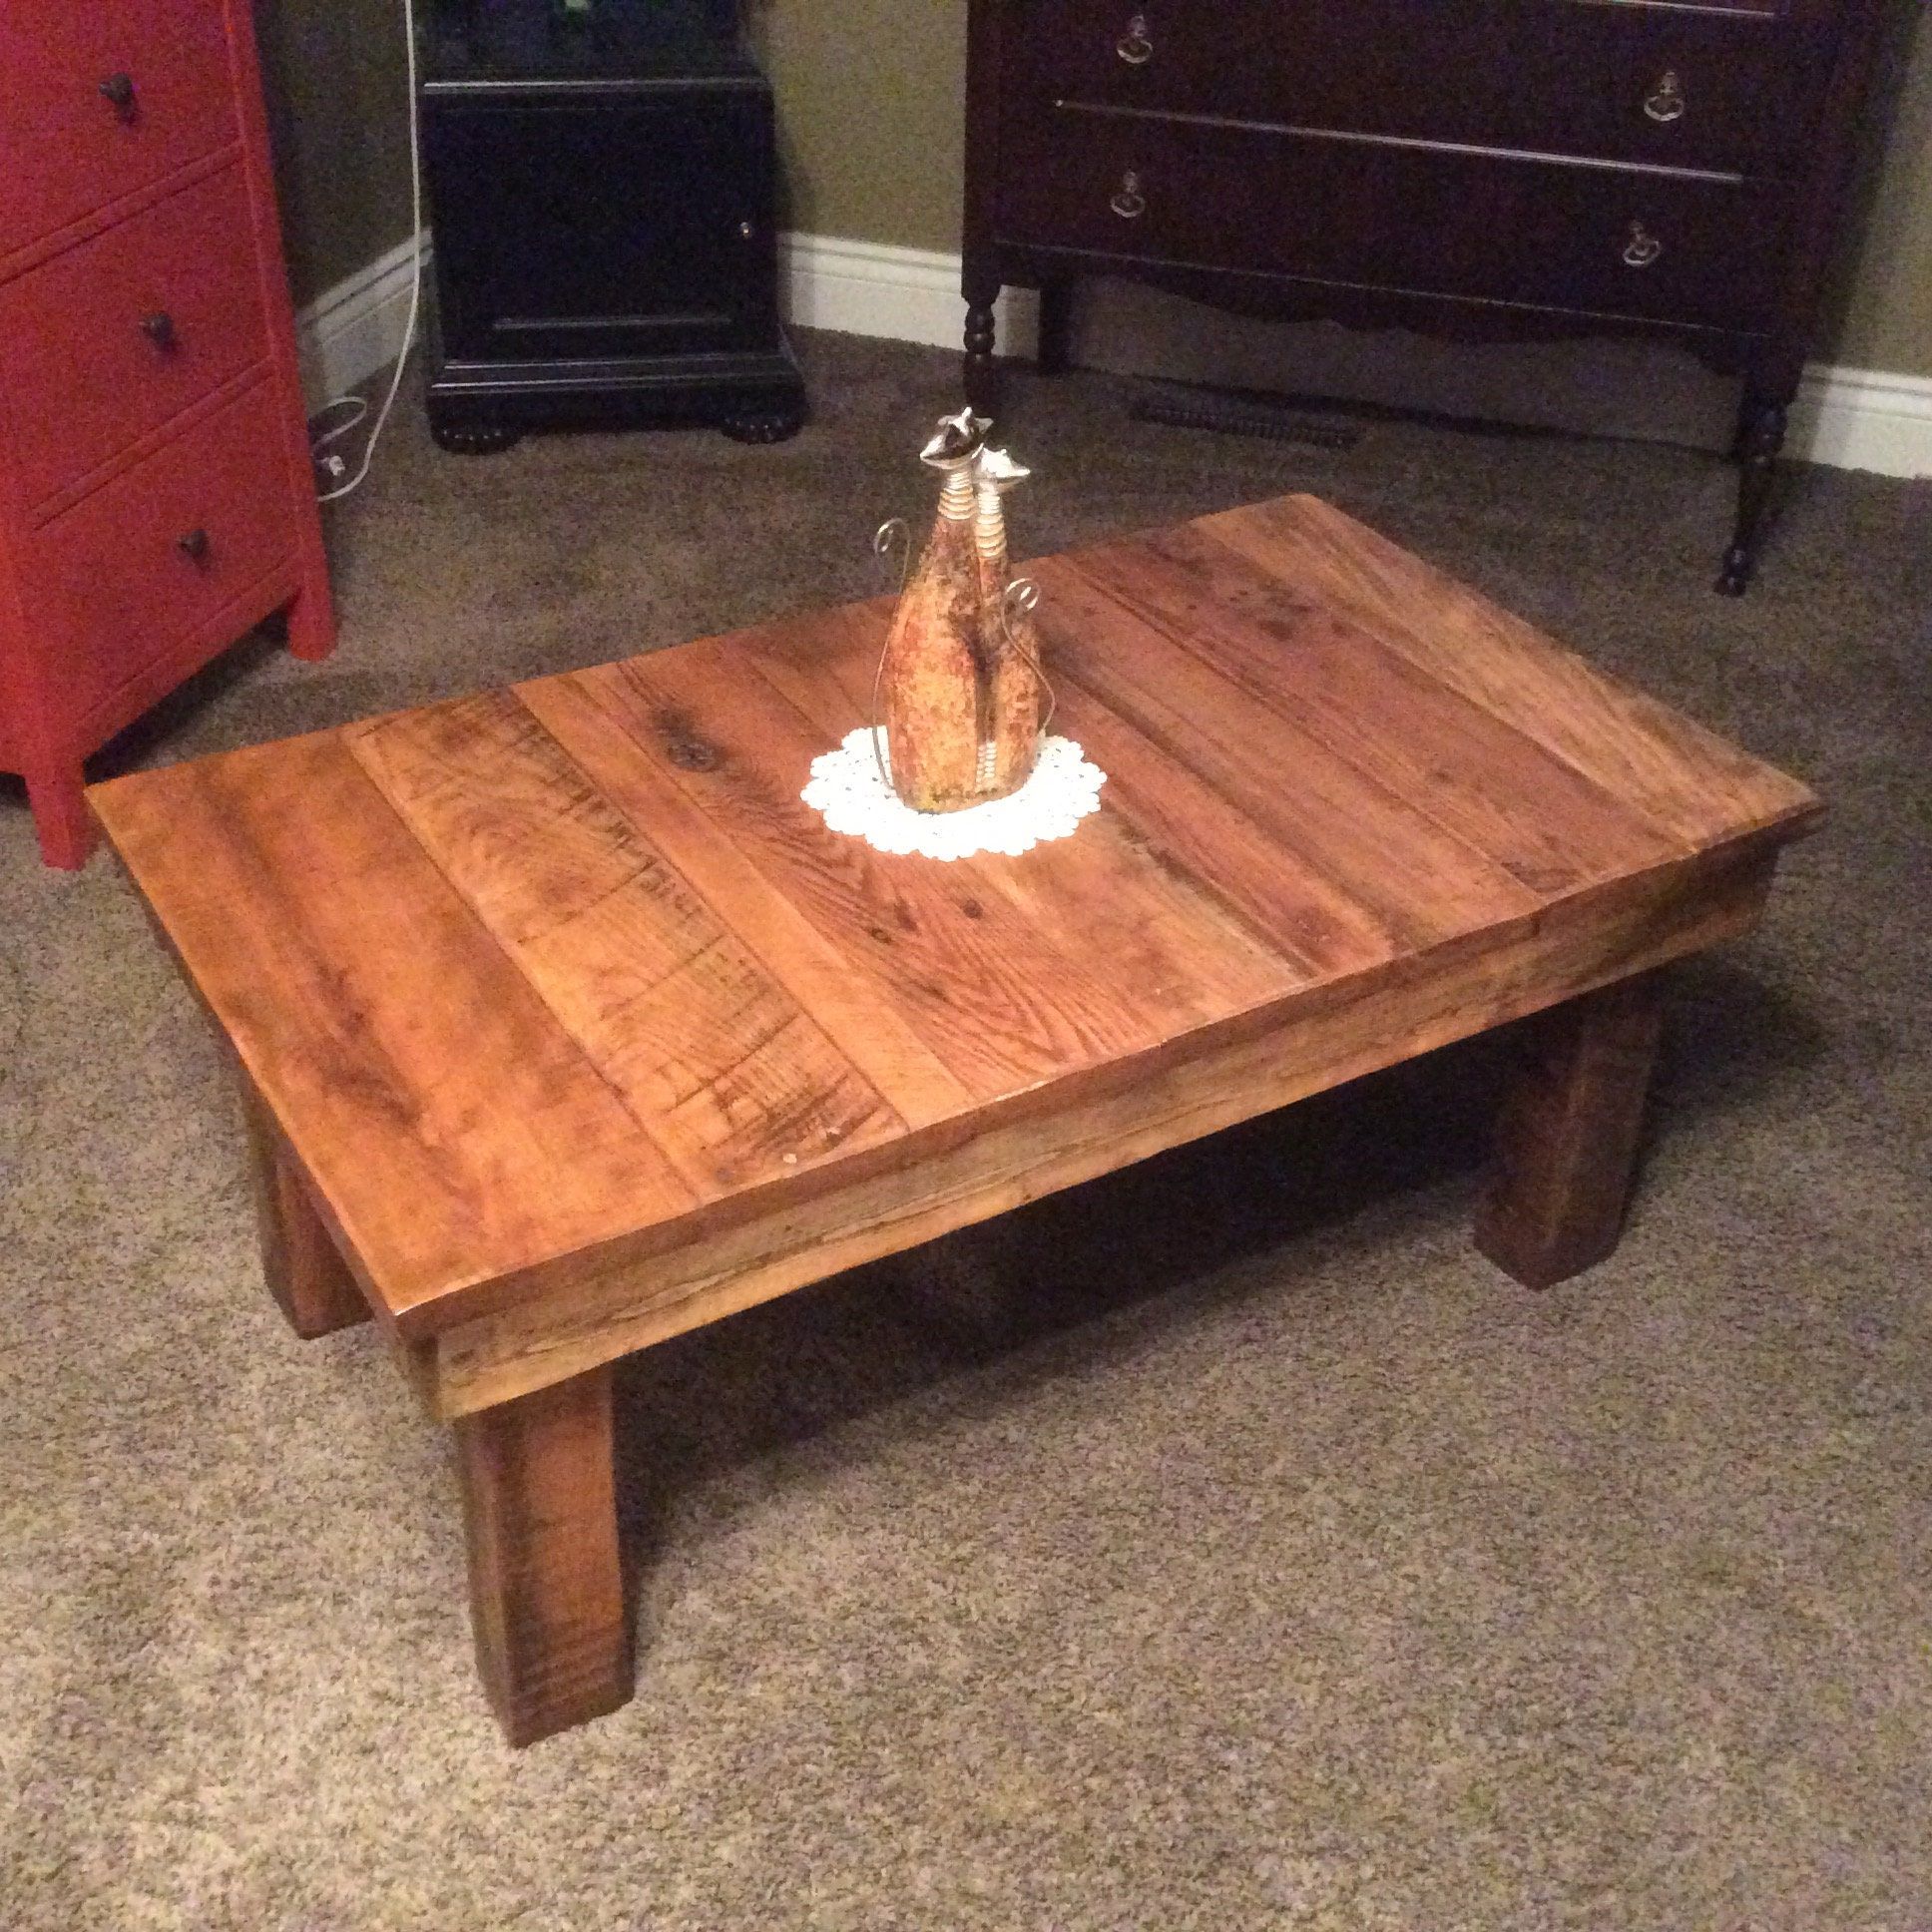 Famous Reclaimed Wood Rustic Coffee Table Throughout Reclaimed Wood Coffee Tables (View 3 of 20)